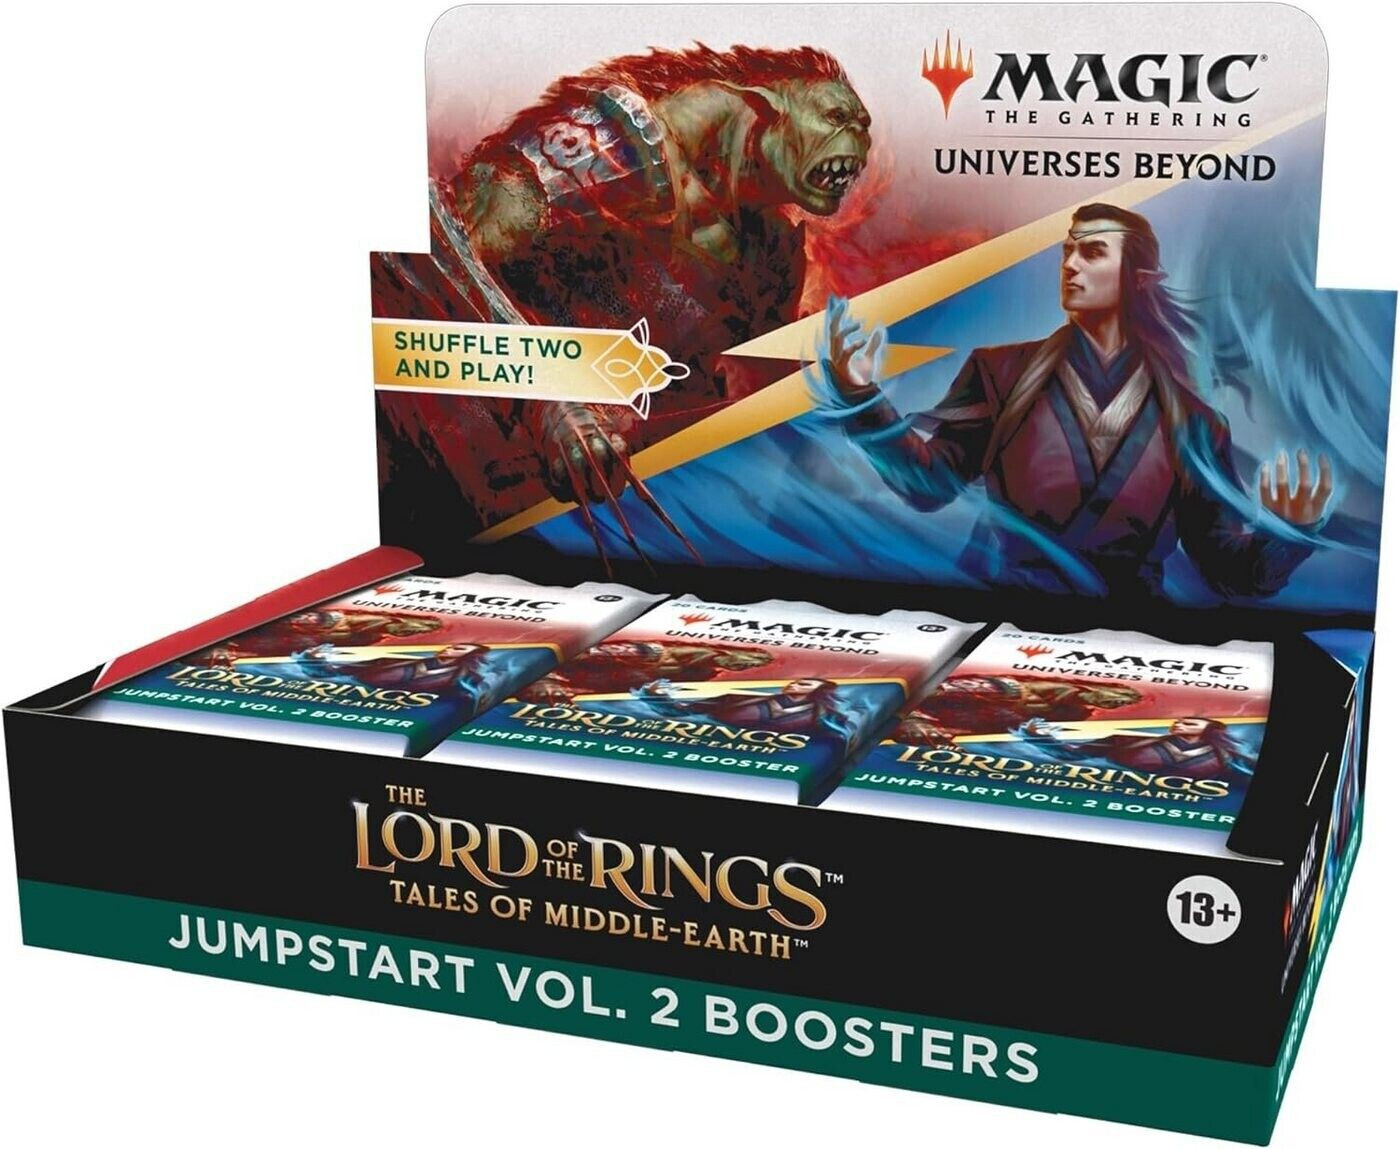 Photos - Other Toys Wizards of the Coast Magic: The Gathering Magic: The Gathering The Lord of Rings: Tales Middle 